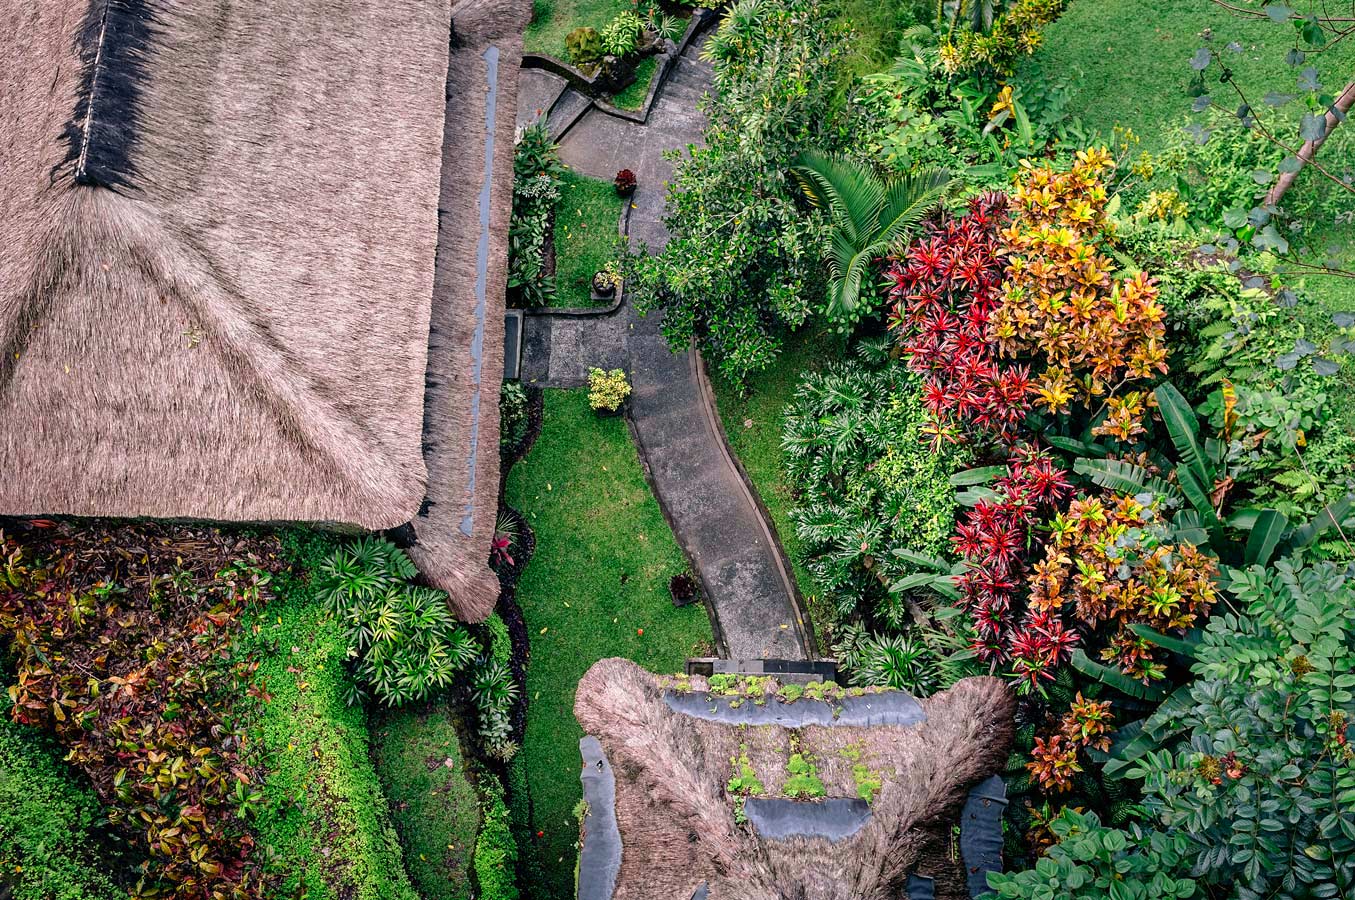 Bali travel photography by Sharon Blance, Melbourne photographer